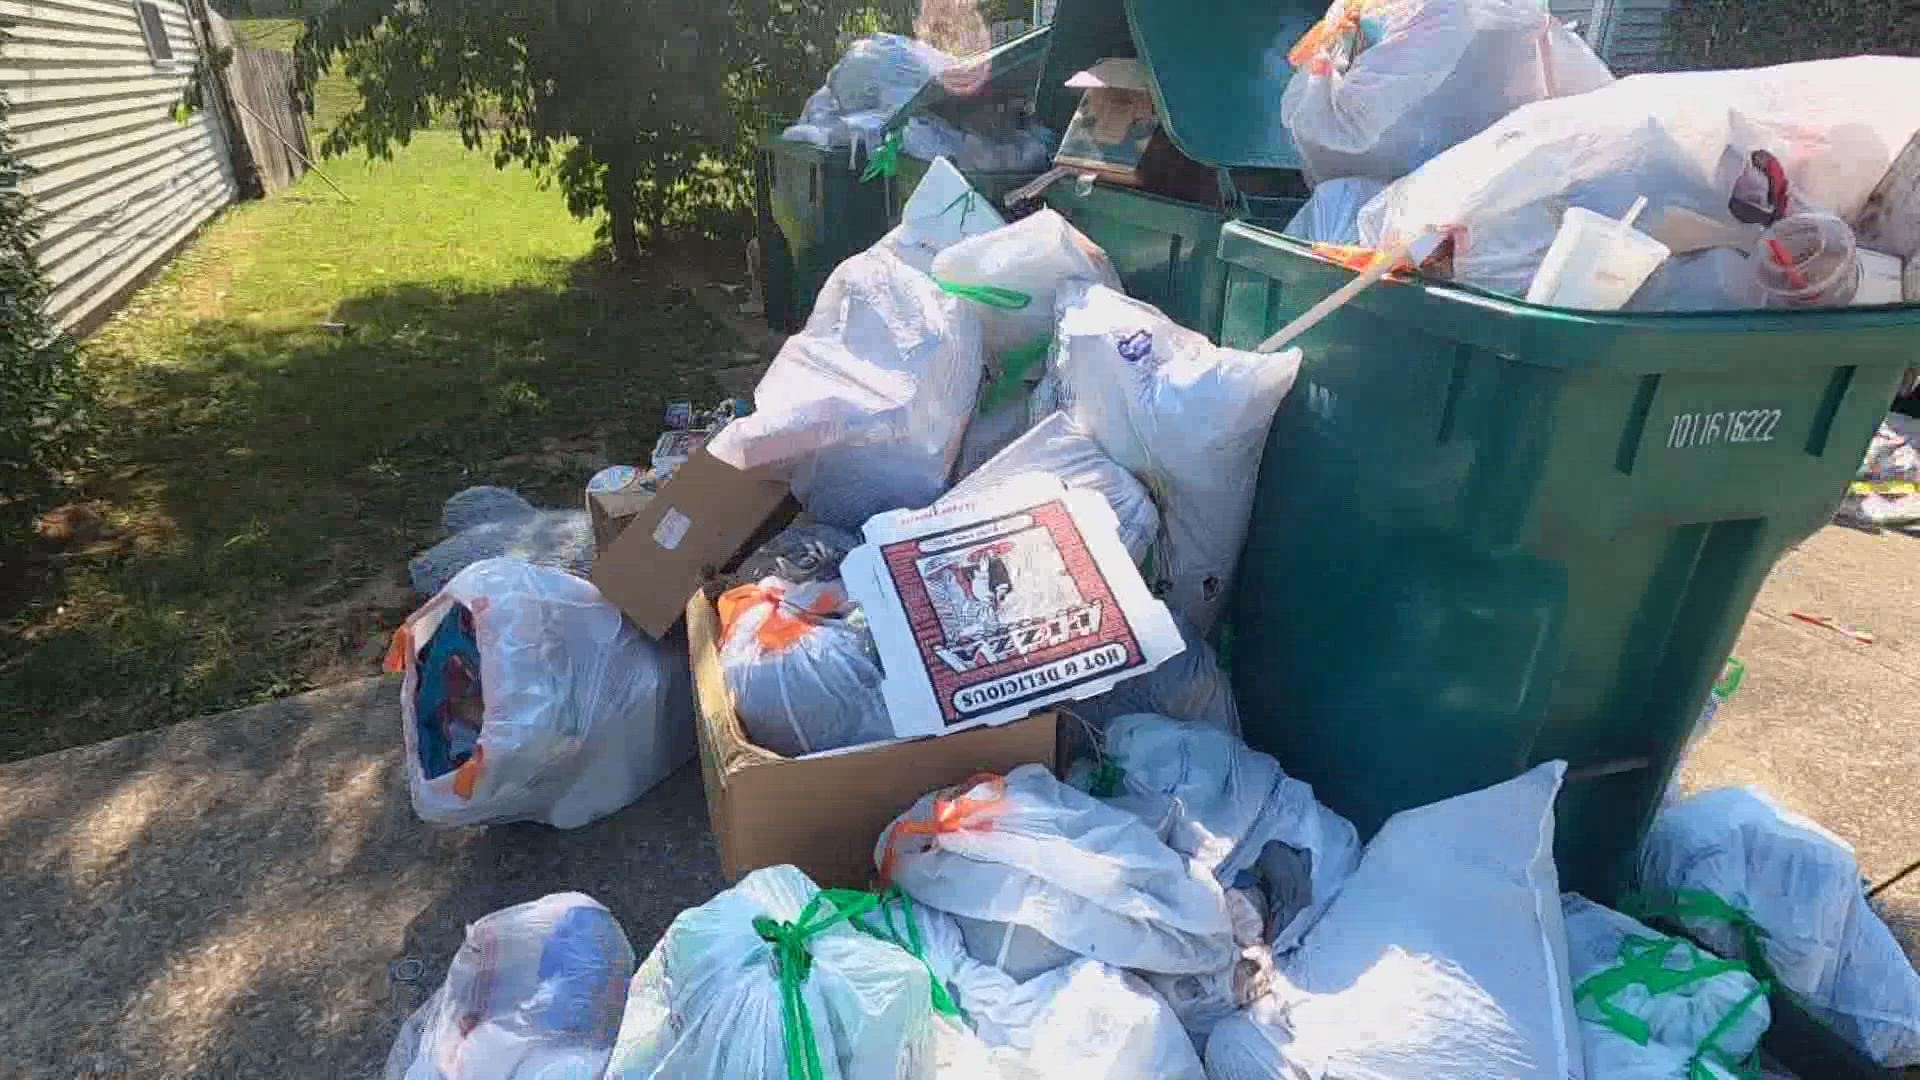 For three weeks, residents of Cowley Crossing in Elizabethtown said Waste Management didn't show up. Residents aired their frustrations as trash piled up.